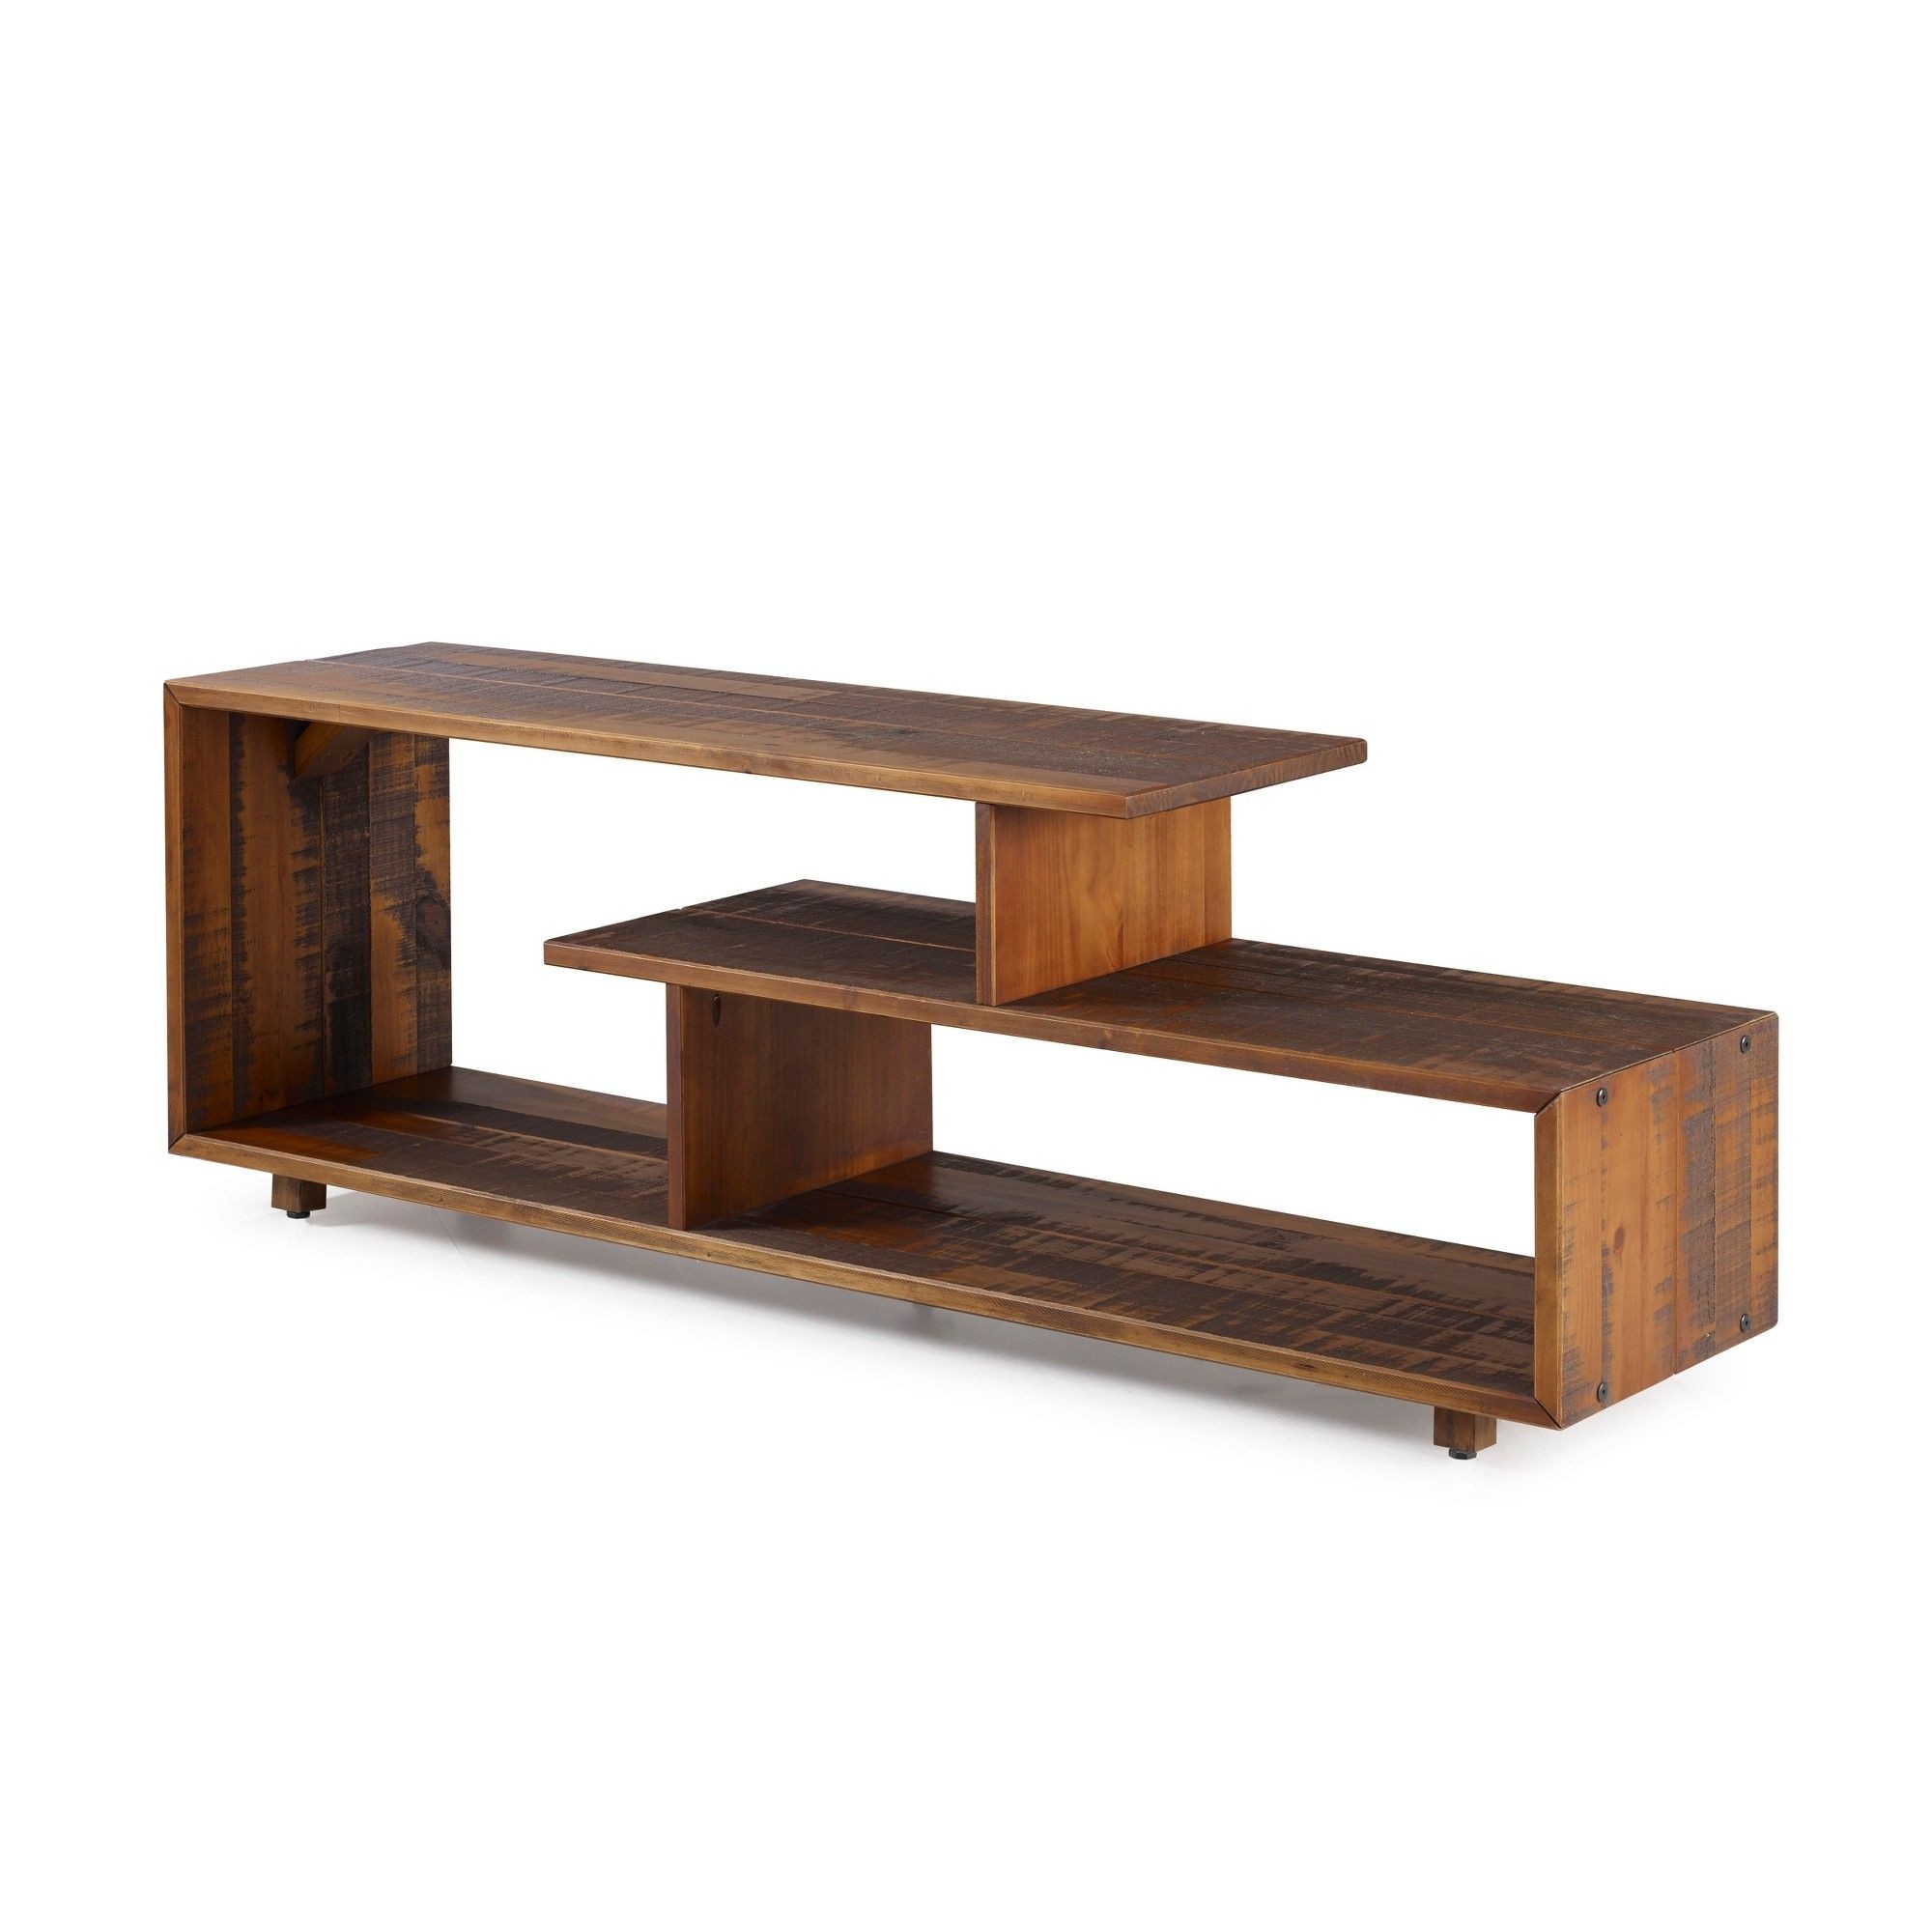 Carrasco Solid Wood TV Stand for TVs up to 65"